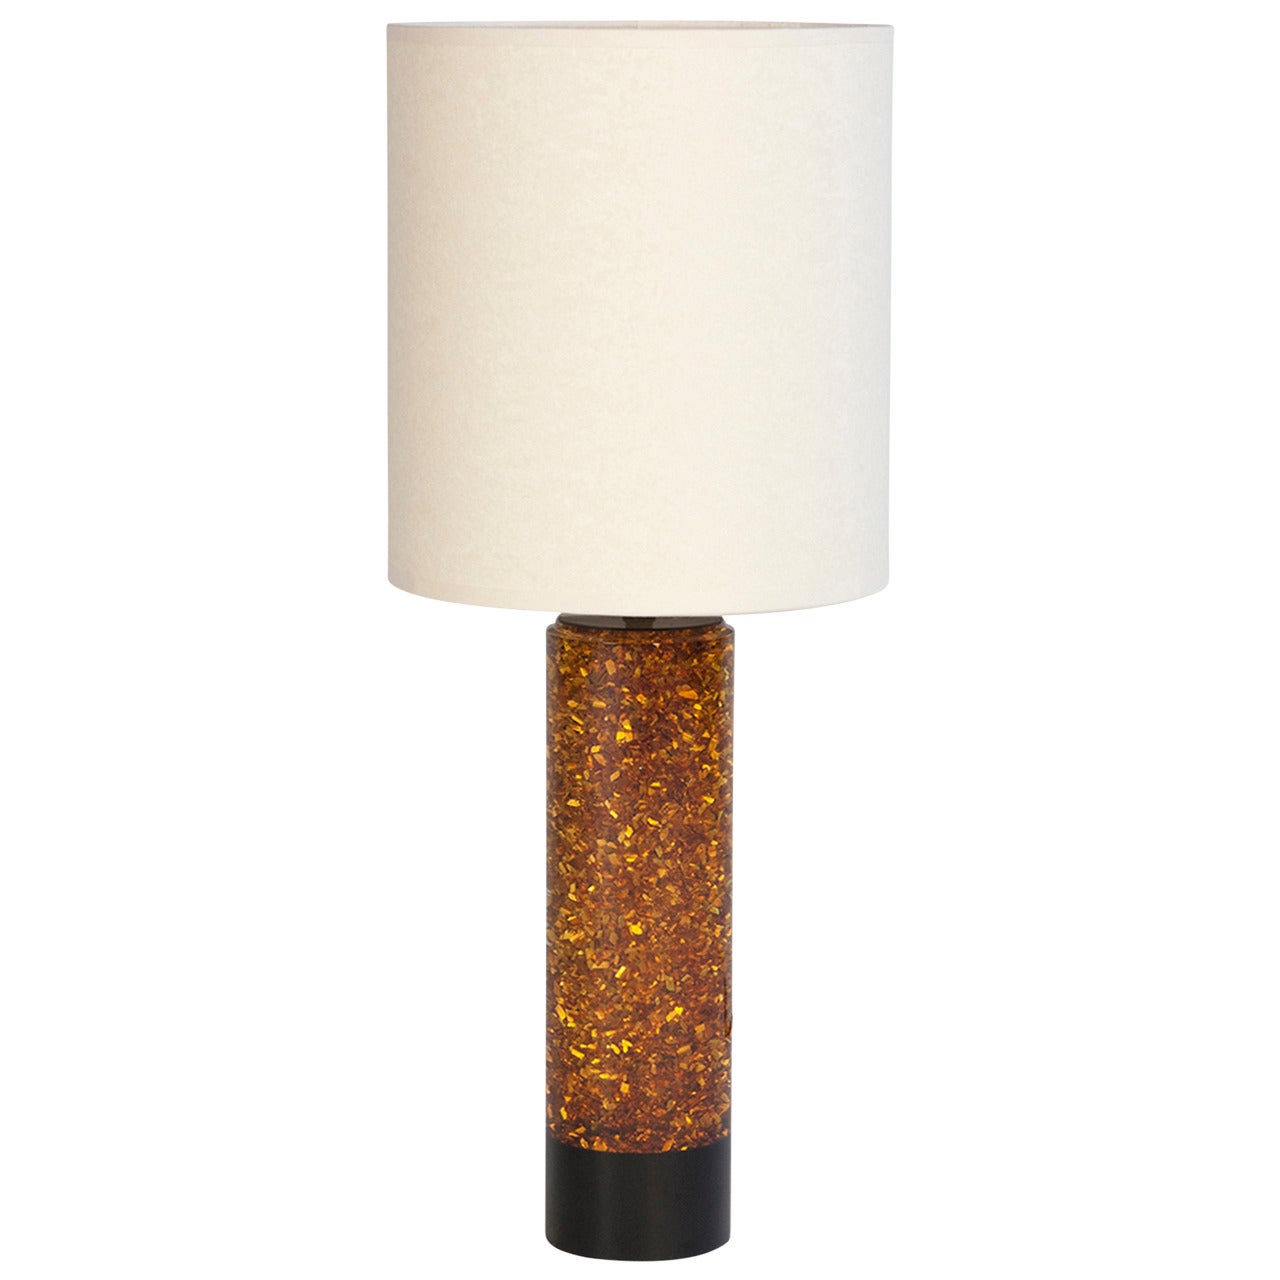 French 1970s Speckle Resin Table Lamp For Sale